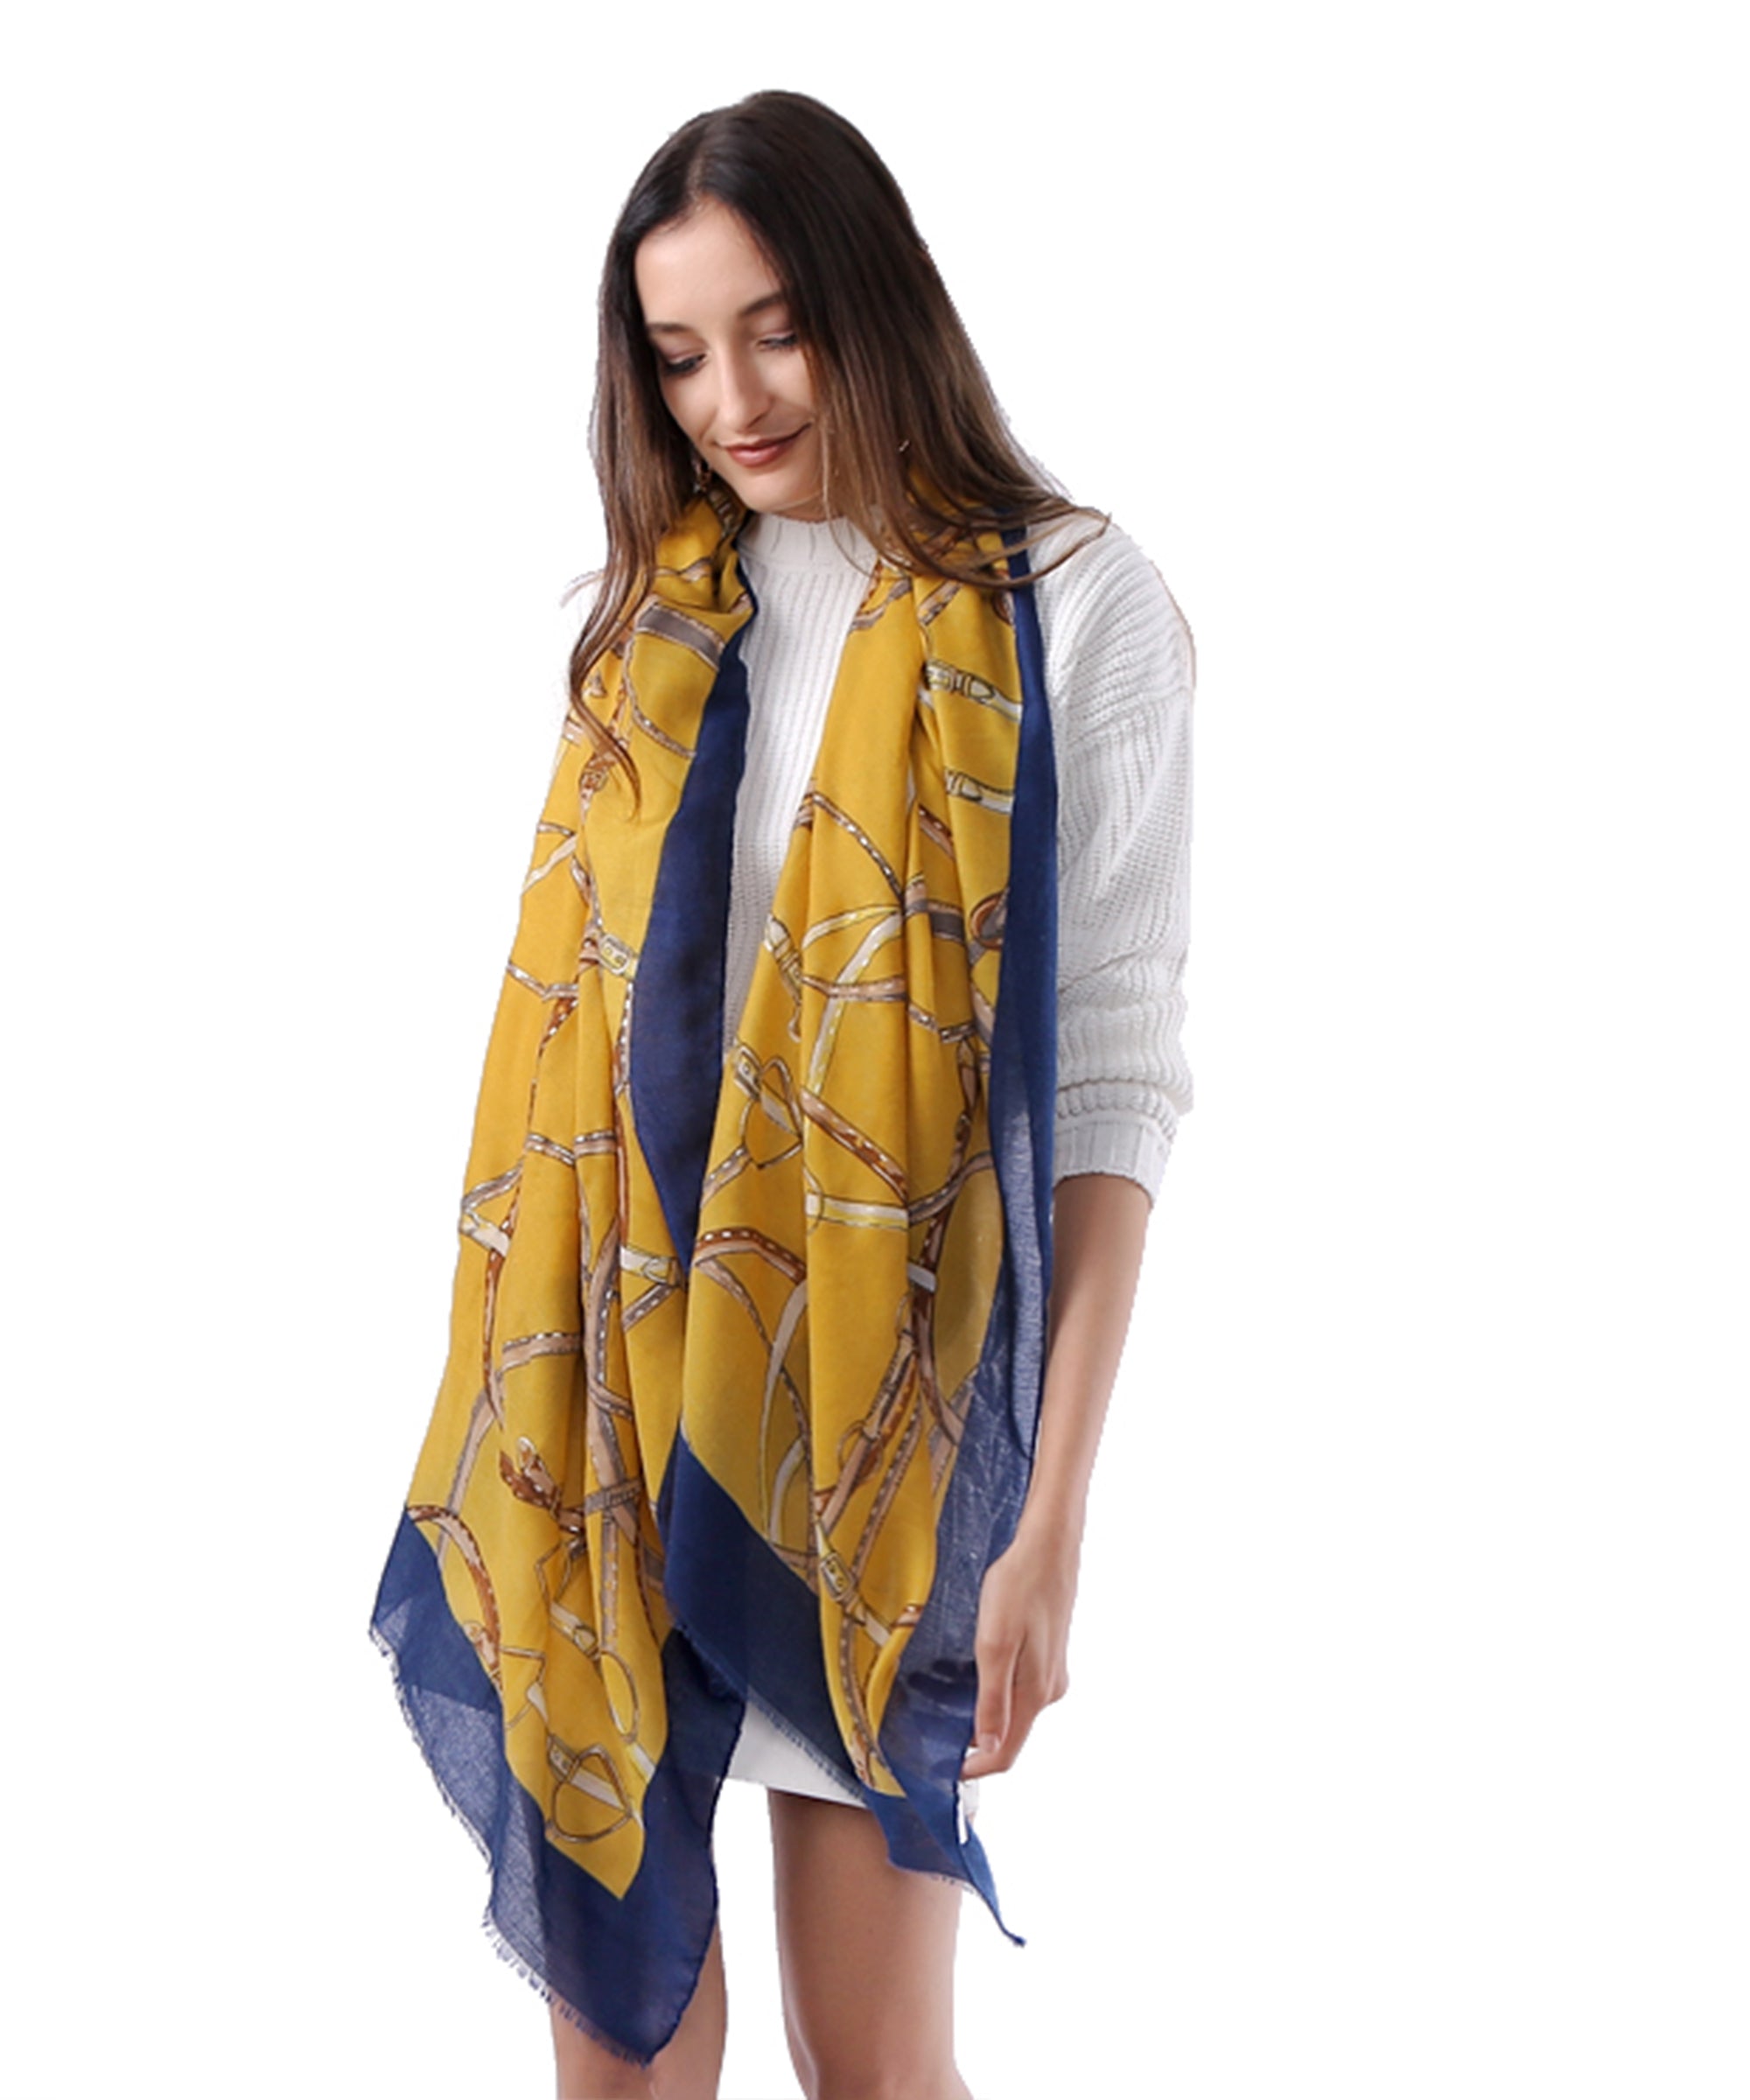 Women's Fashion Blog - Style Blog For Women – Tagged women's scarves –  Just Style LA